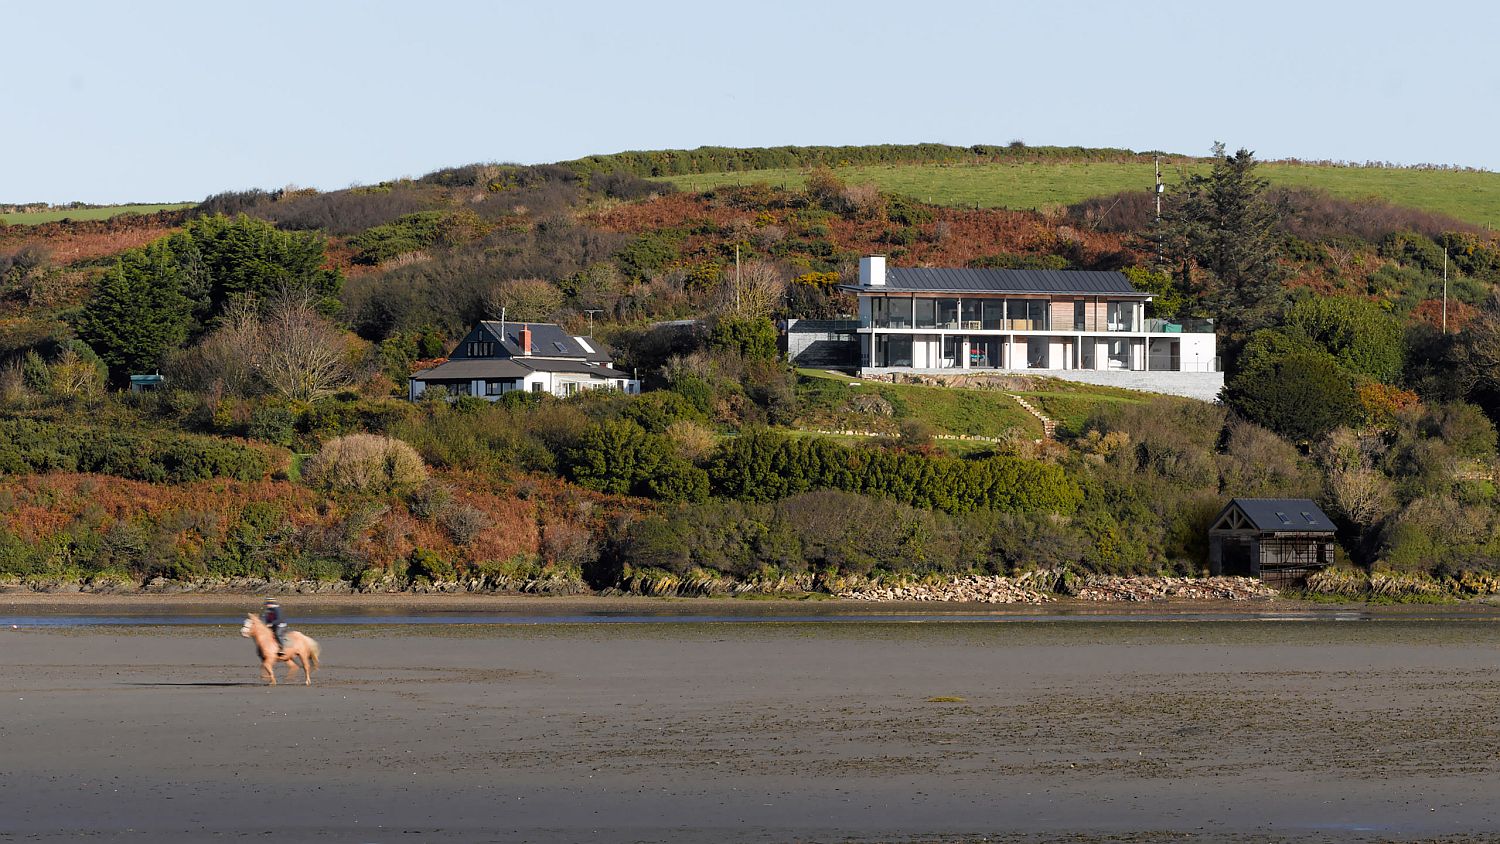 Awesome-natural-beauty-along-with-a-wide-estuary-and-sea-await-at-this-home-in-Wales